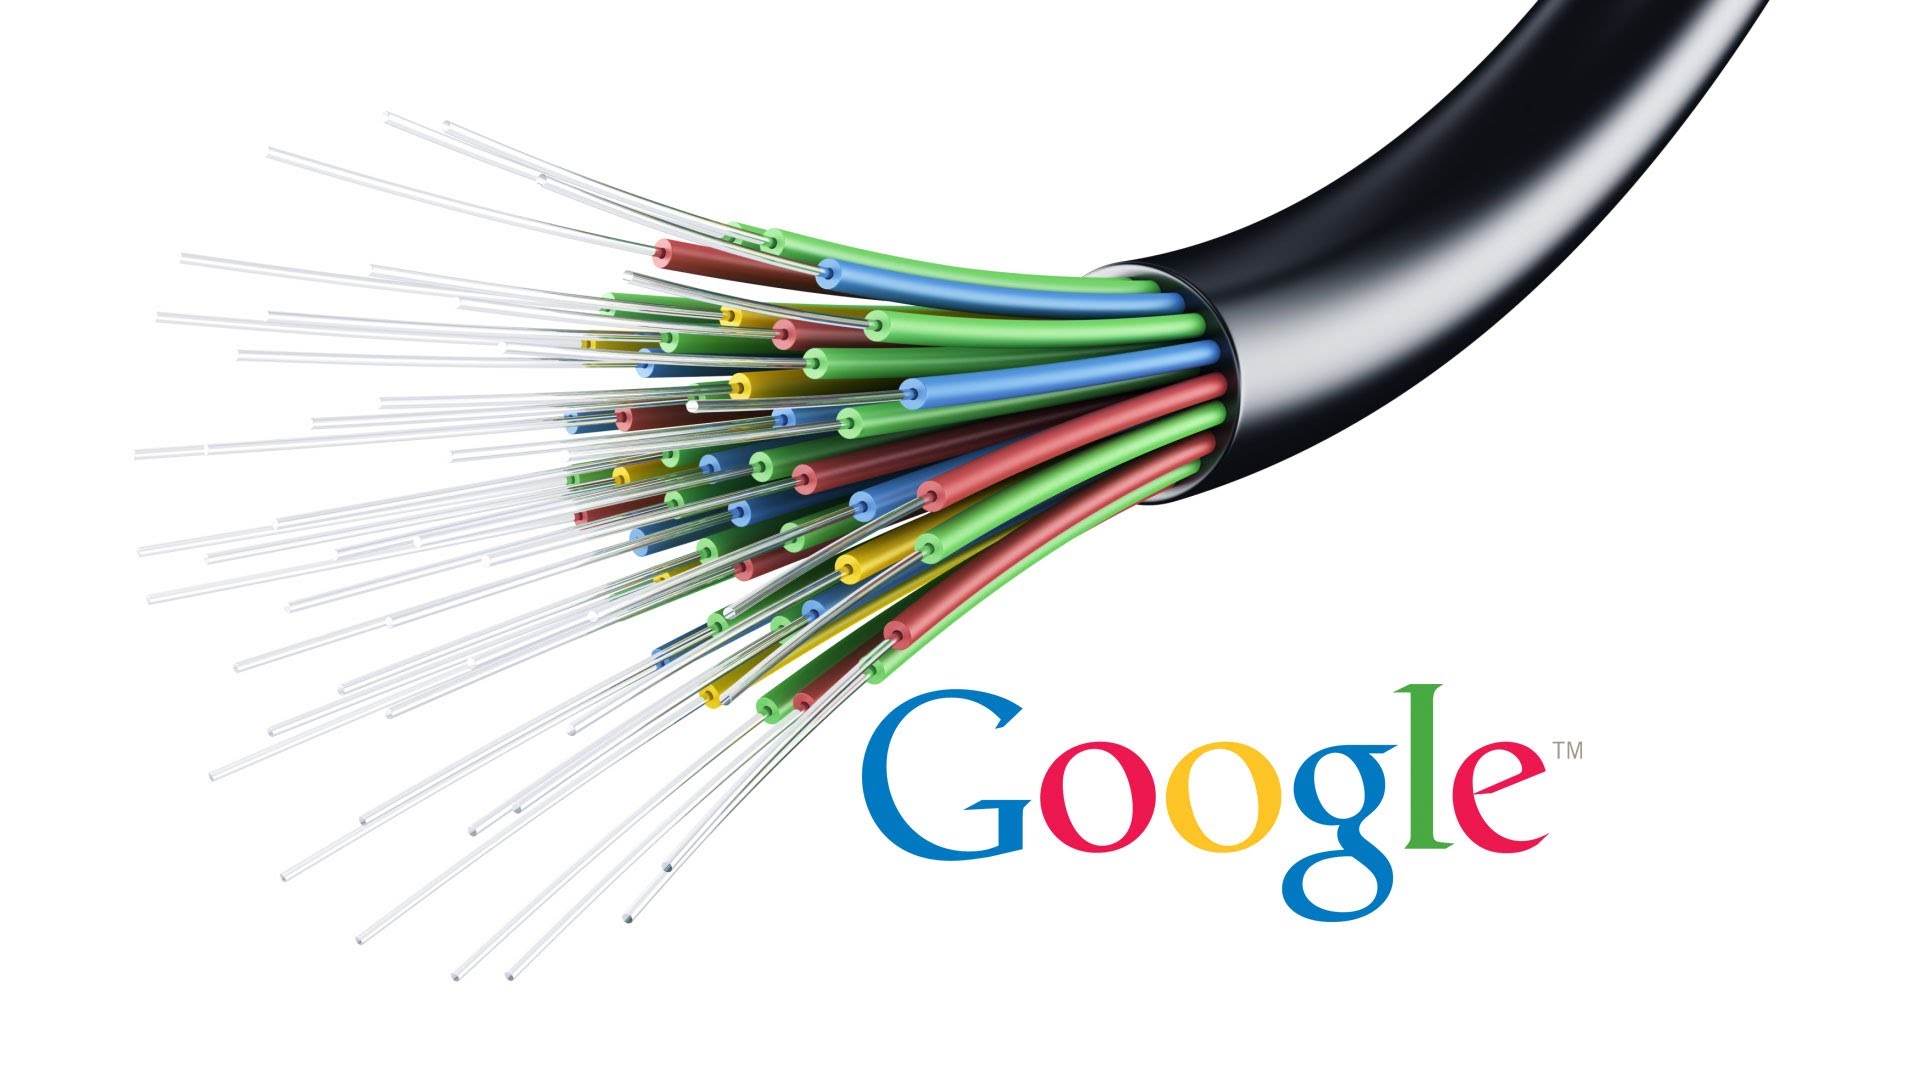 Google FASTER Cable-umshare聯合分享網